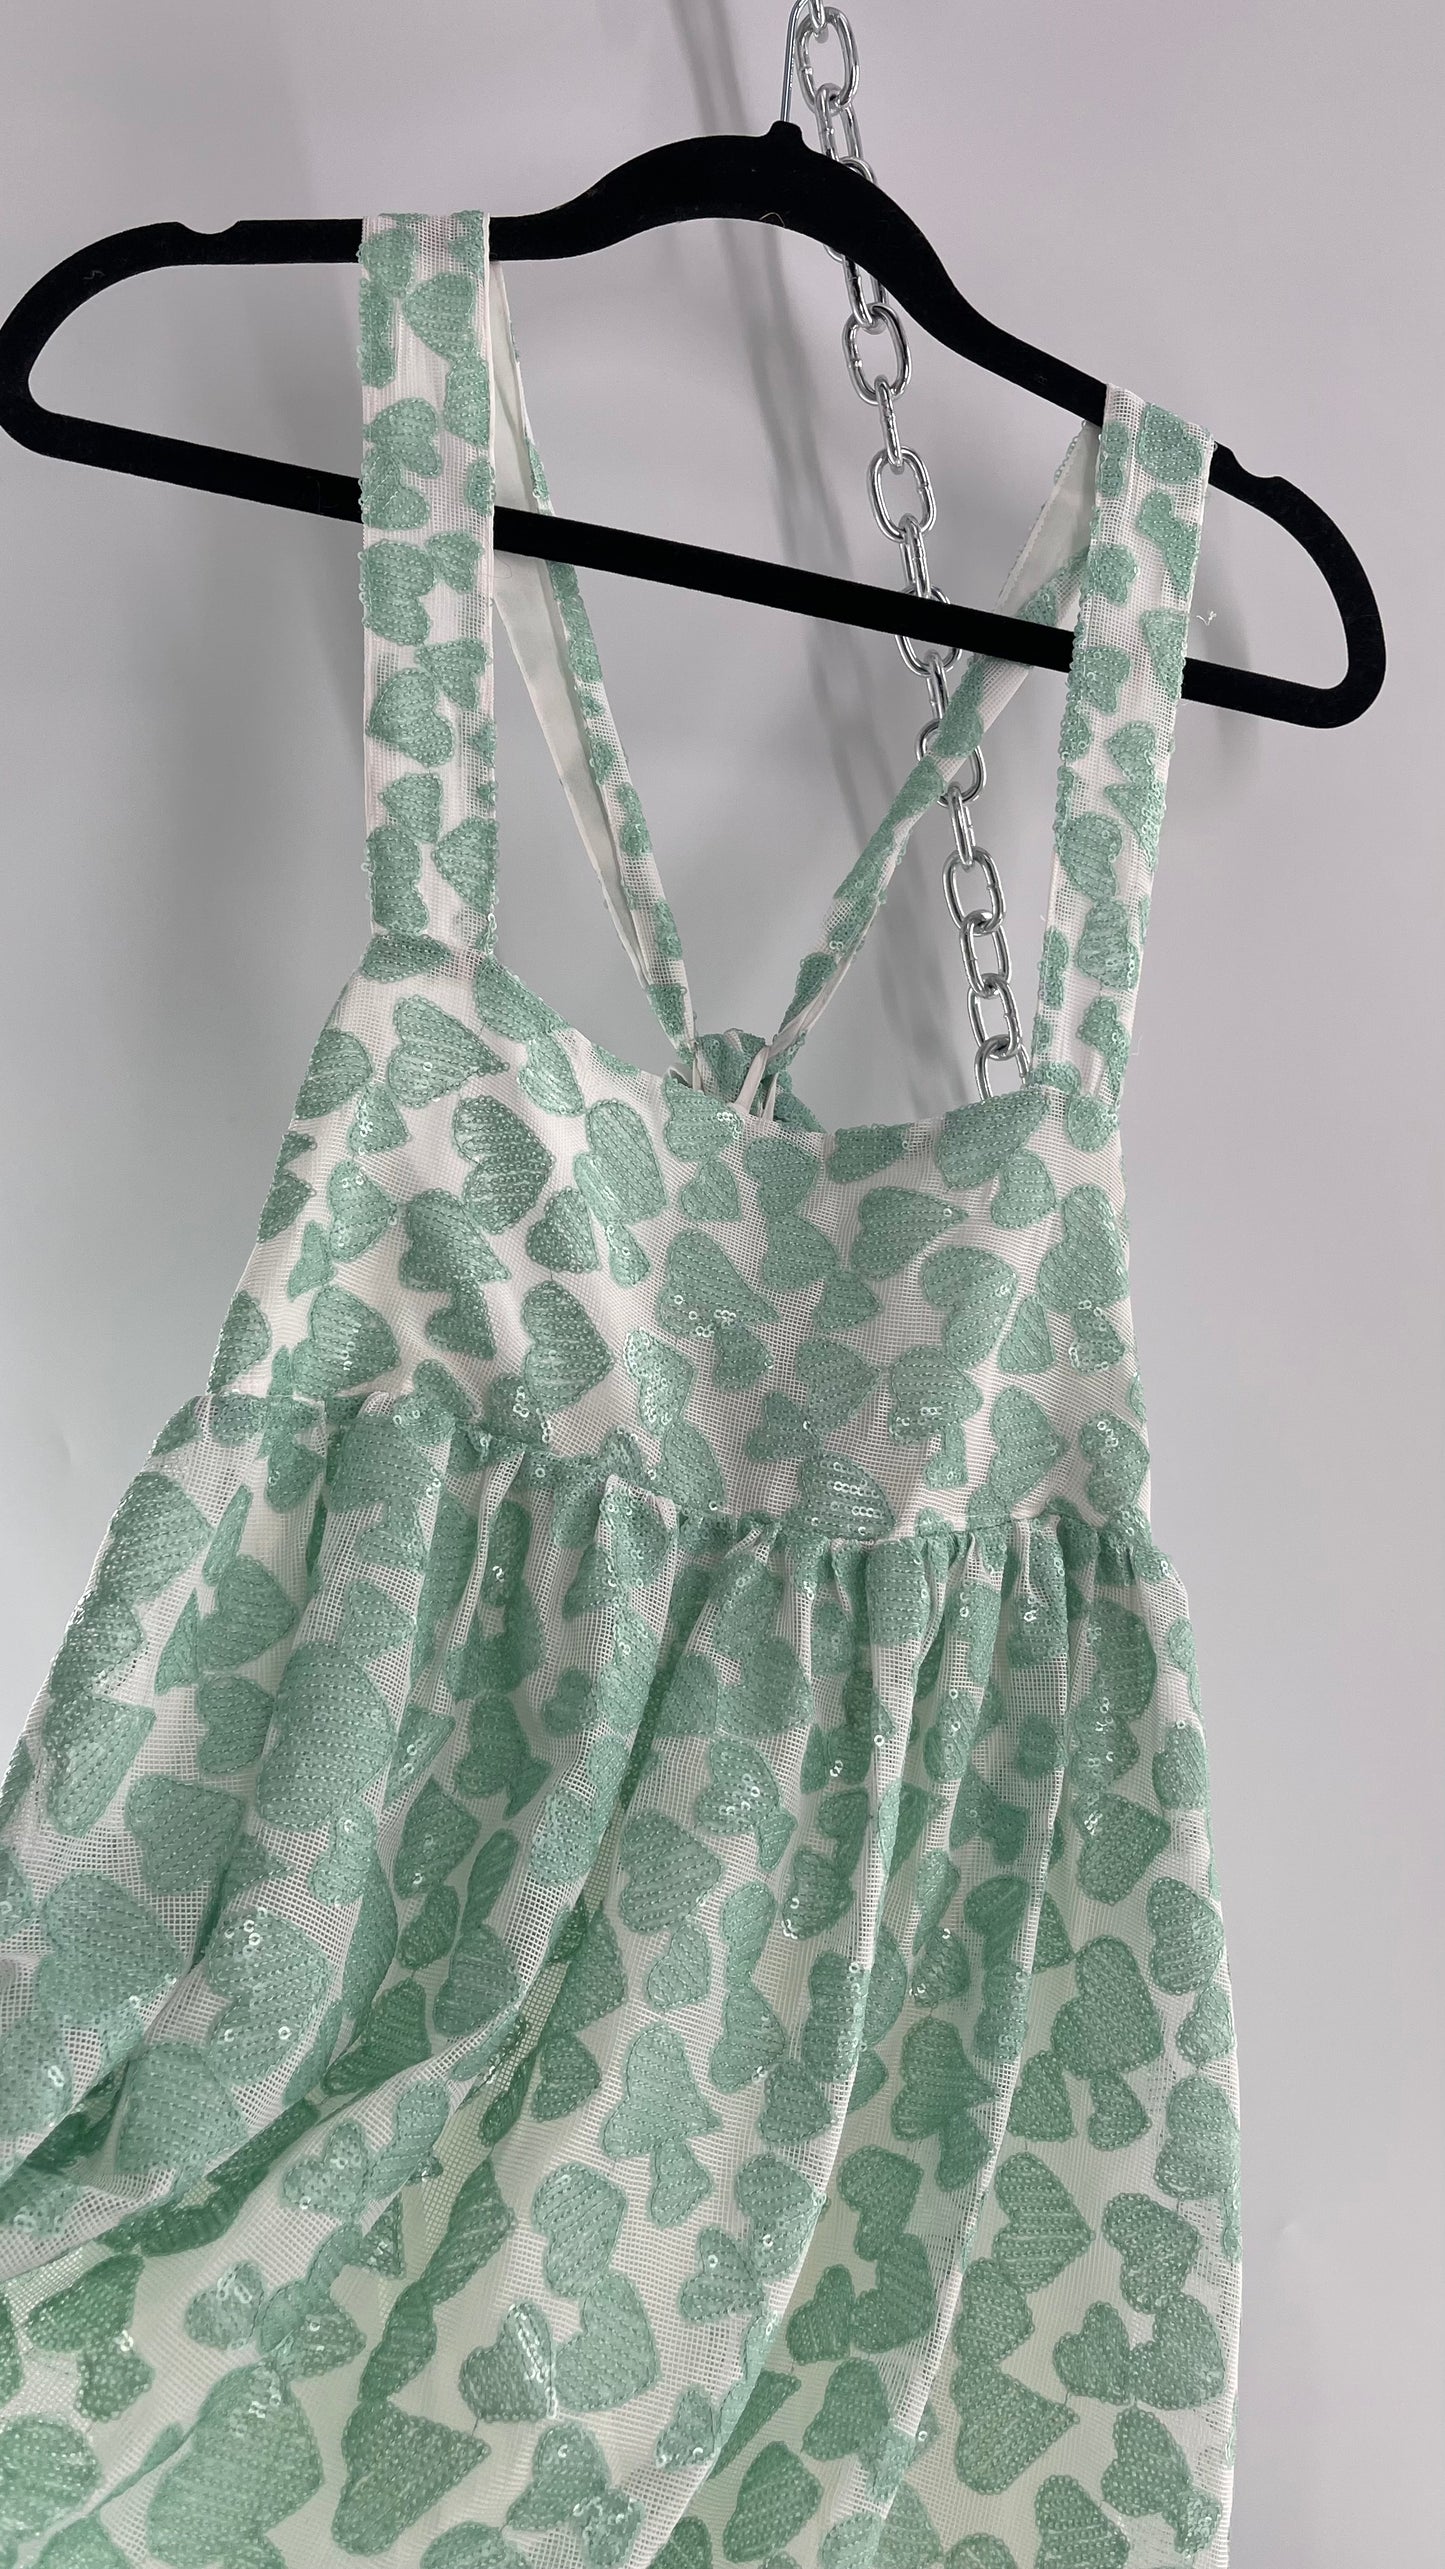 Kimchi Blue Babydoll Dress Covered in Sequin Teal/Mint Hearts (Medium)